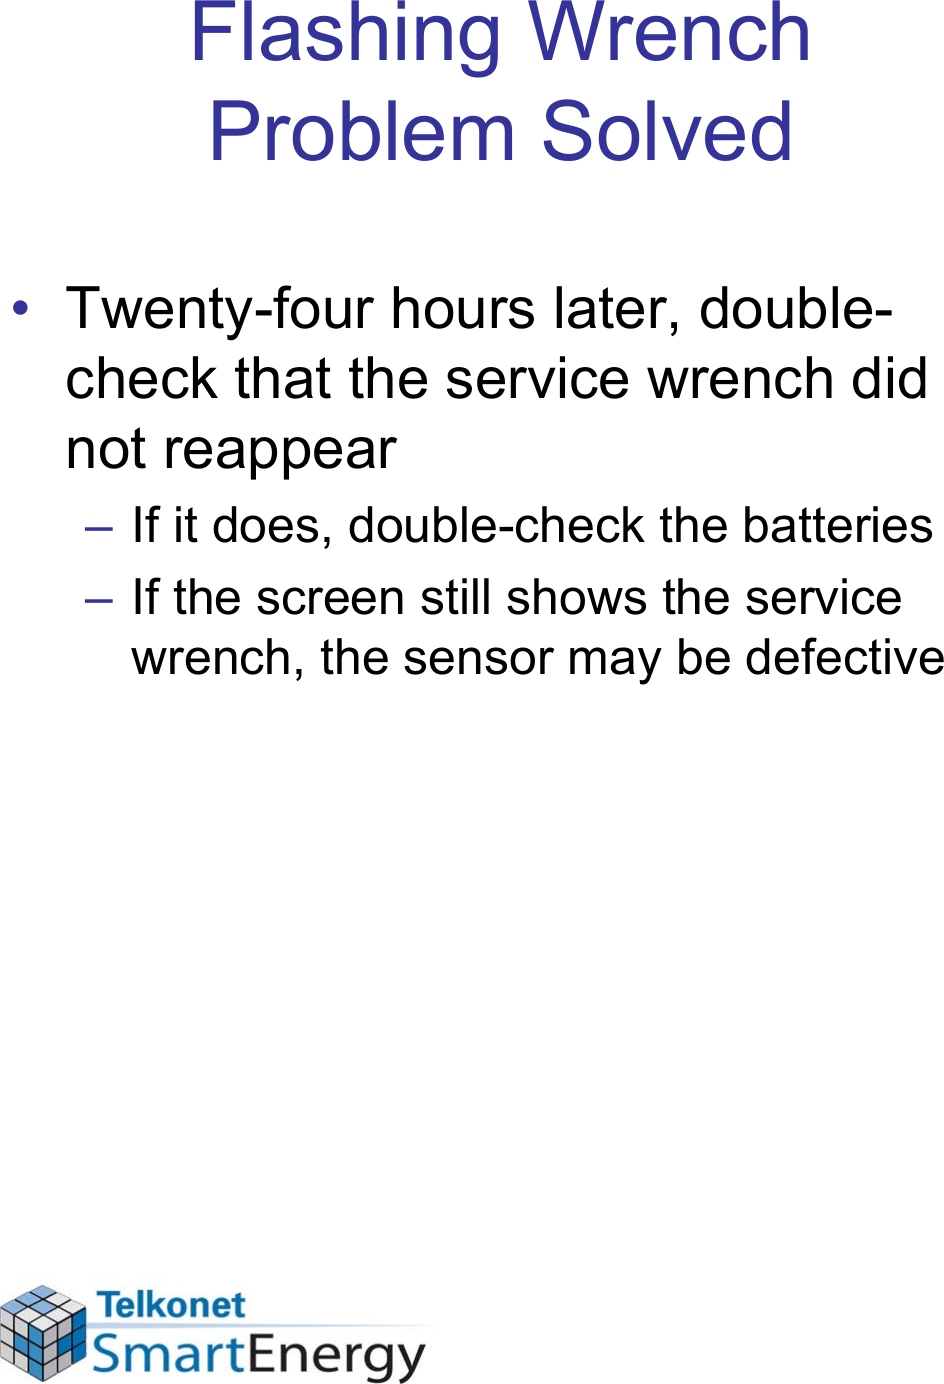 Flashing Wrench Problem Solved• Twenty-four hours later, double- check that the service wrench did not reappear– If it does, double-check the batteries– If the screen still shows the service wrench, the sensor may be defective